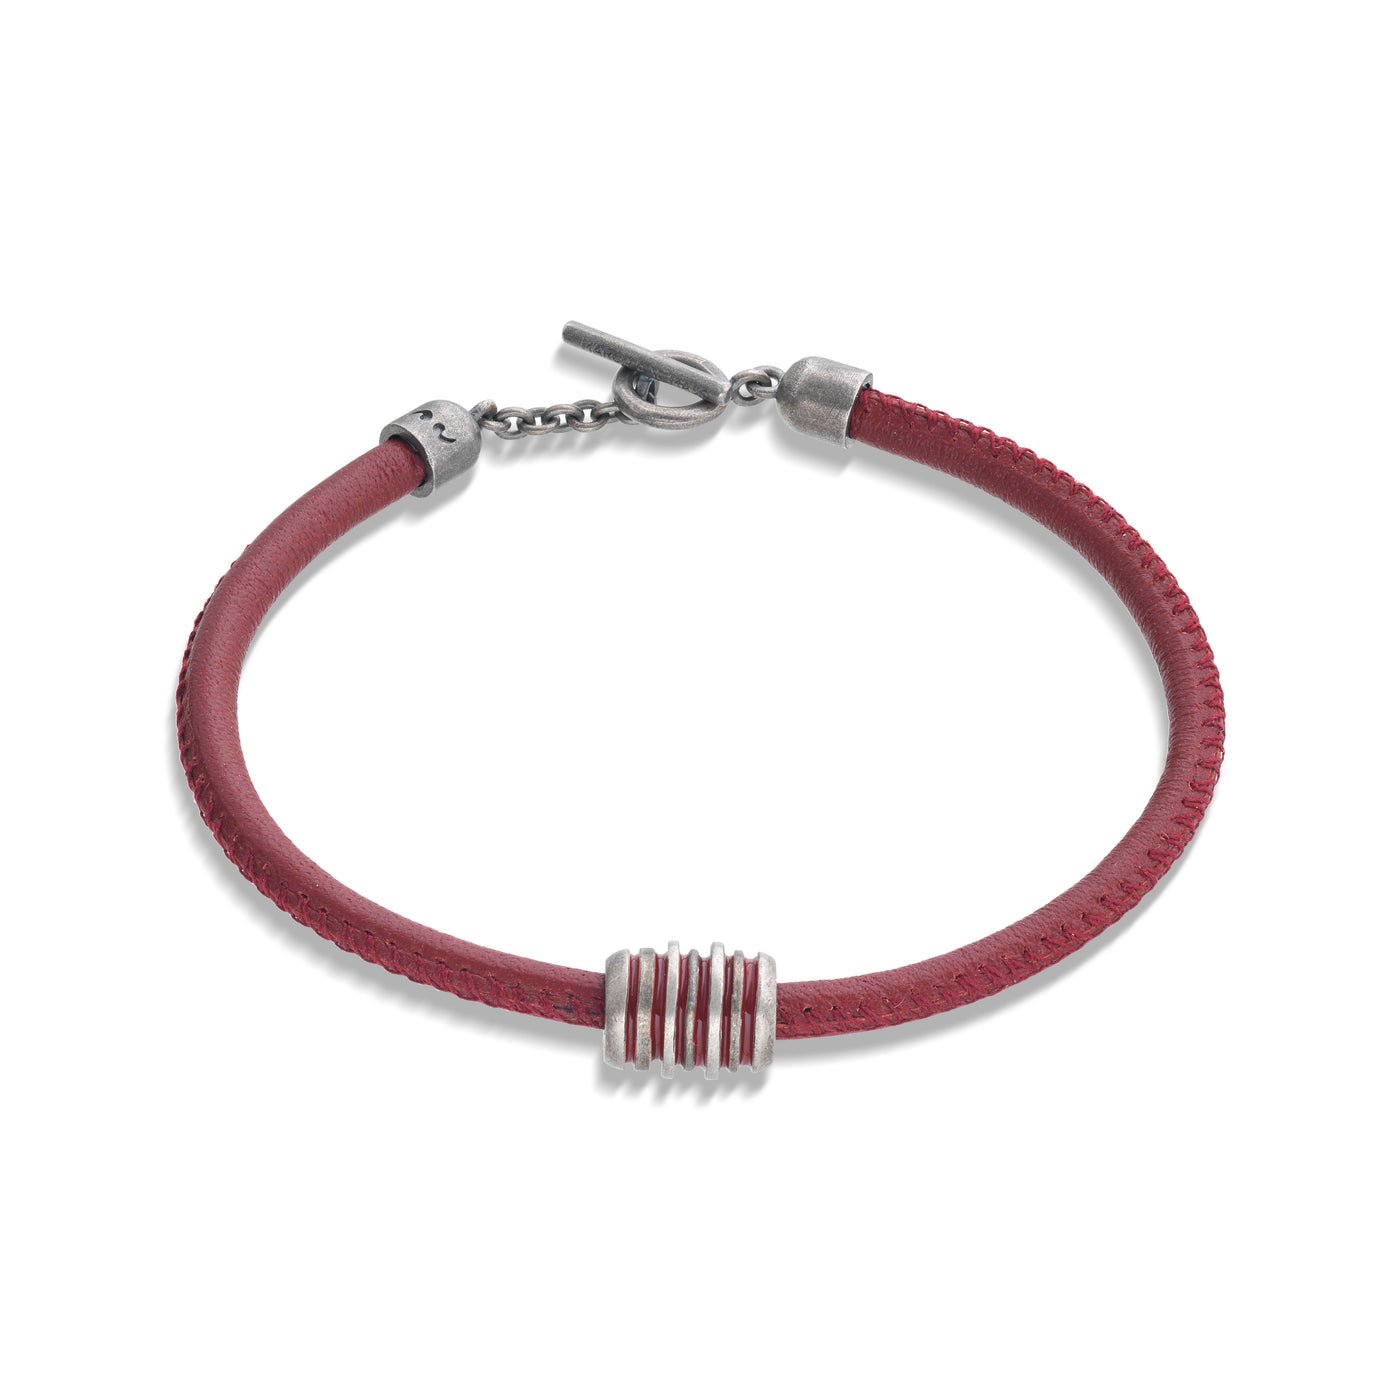 Roller Oxidized Silver Bracelet with red enamel and leather